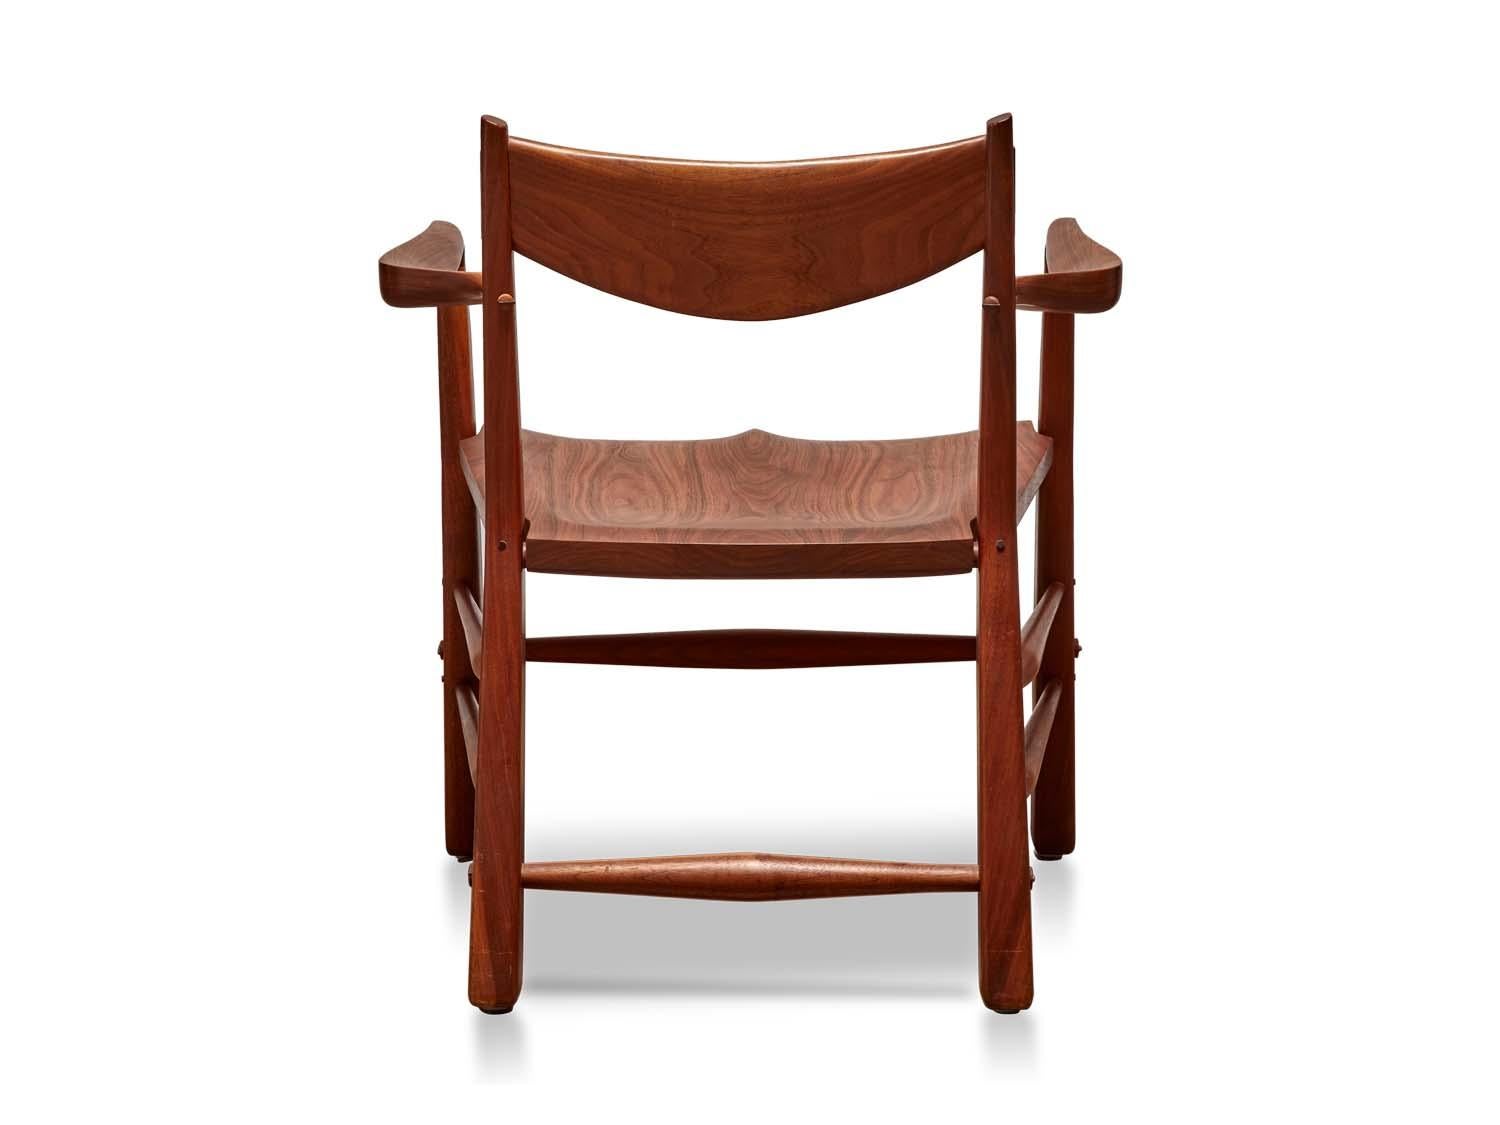 Pair of Sculptural Walnut Chairs by Richard Patterson 1